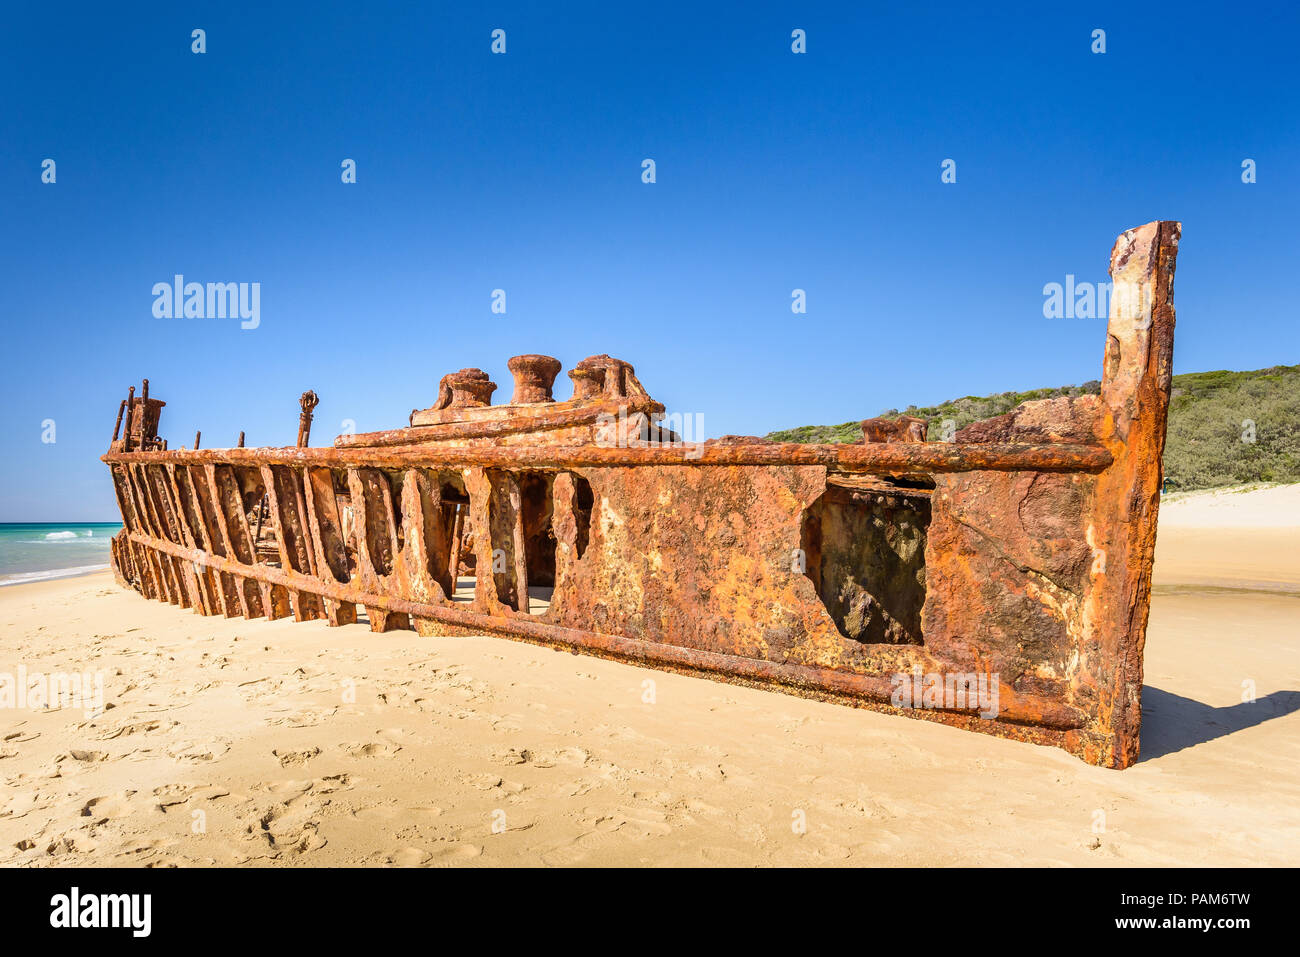 The rusting Maheno shipwreck, on the beach on Fraser Island, Queensland, Australia, photographed in bright sunlight against a clear blue sky Stock Photo